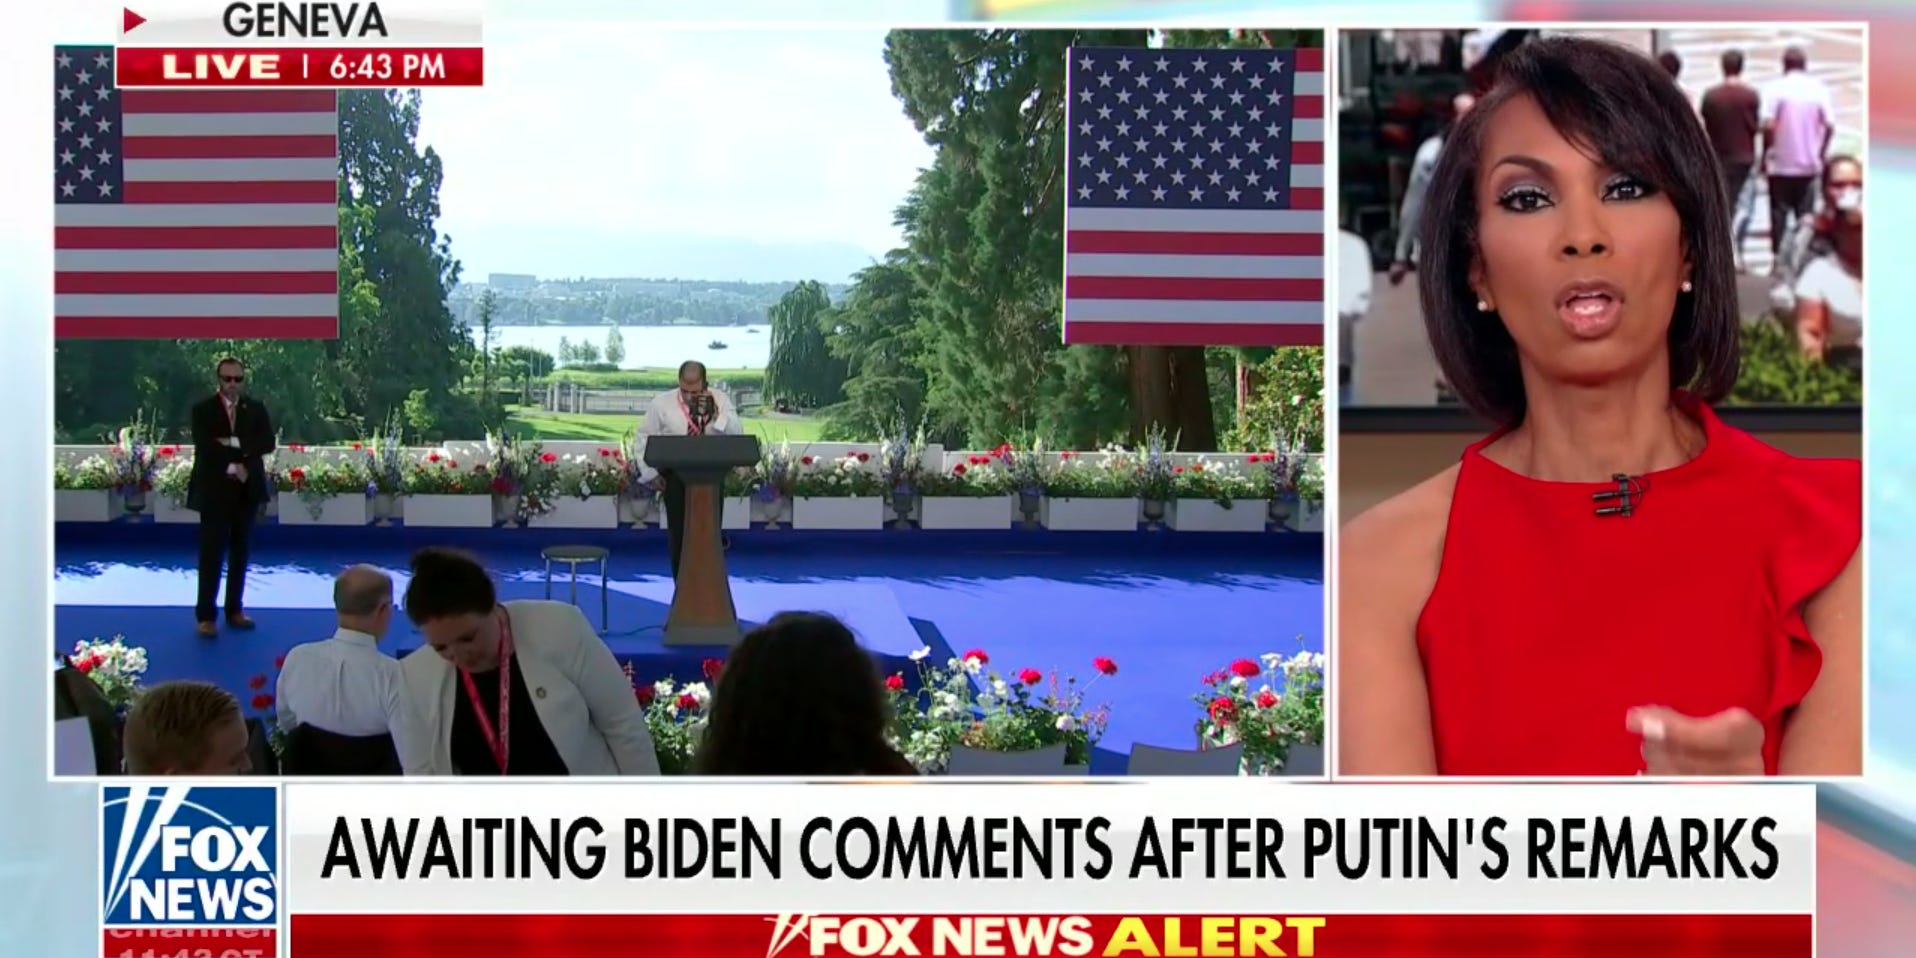 Fox News anchor Harris Faulkner reacts to Russian President Vladimir Putin's solo press conference in Geneva, Switzerland. A chyron underneath her reads "Awaiting Biden comments after Putin's remarks."